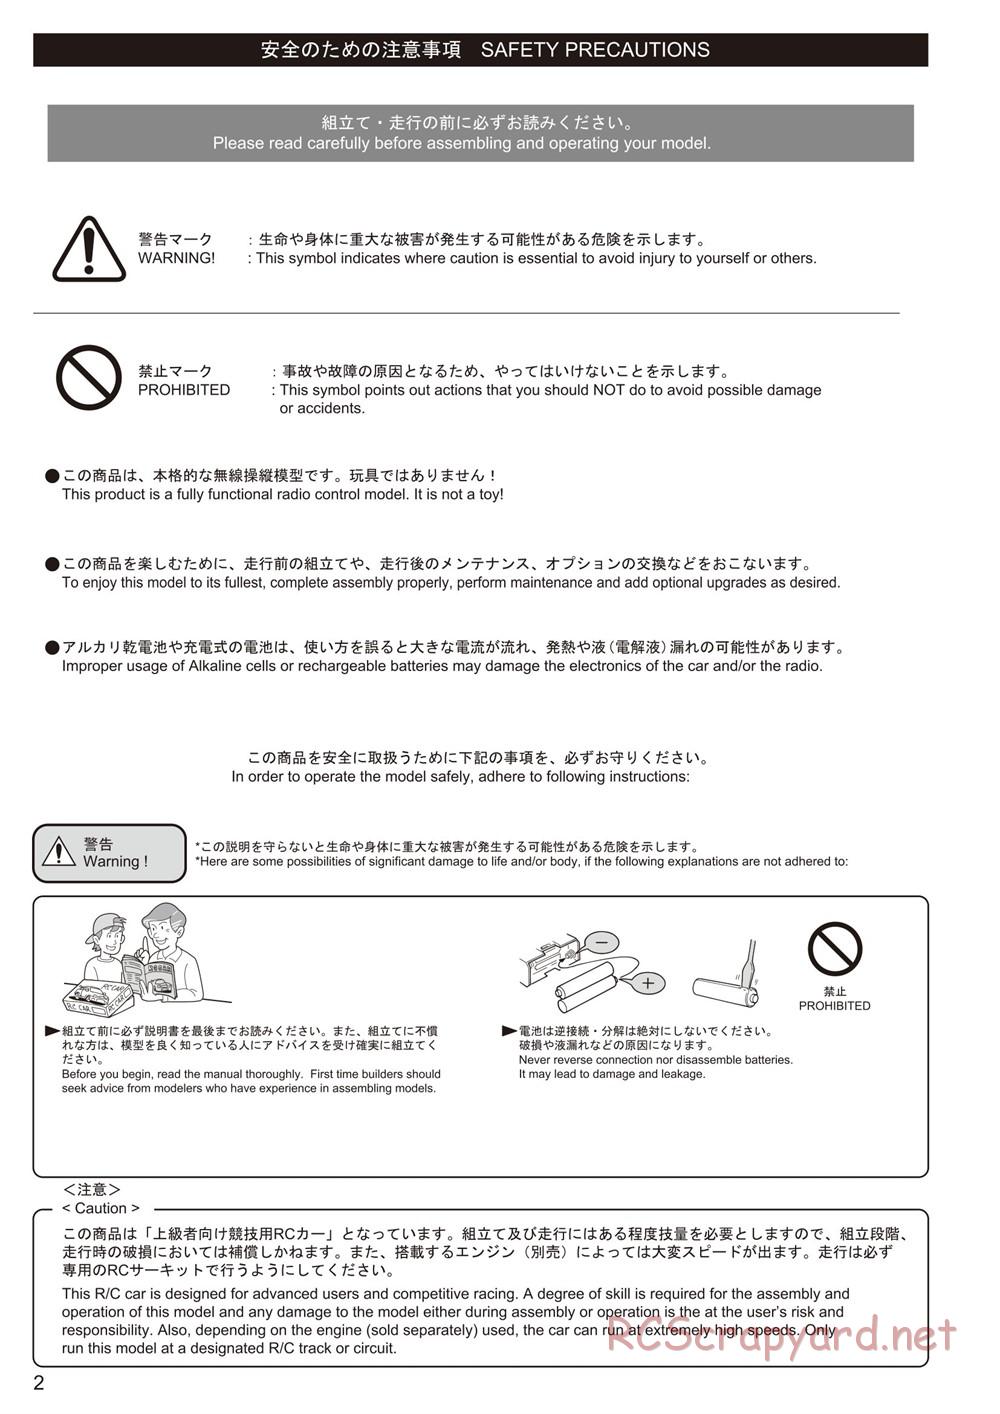 Kyosho - Ultima RB6.6 - Manual - Page 2